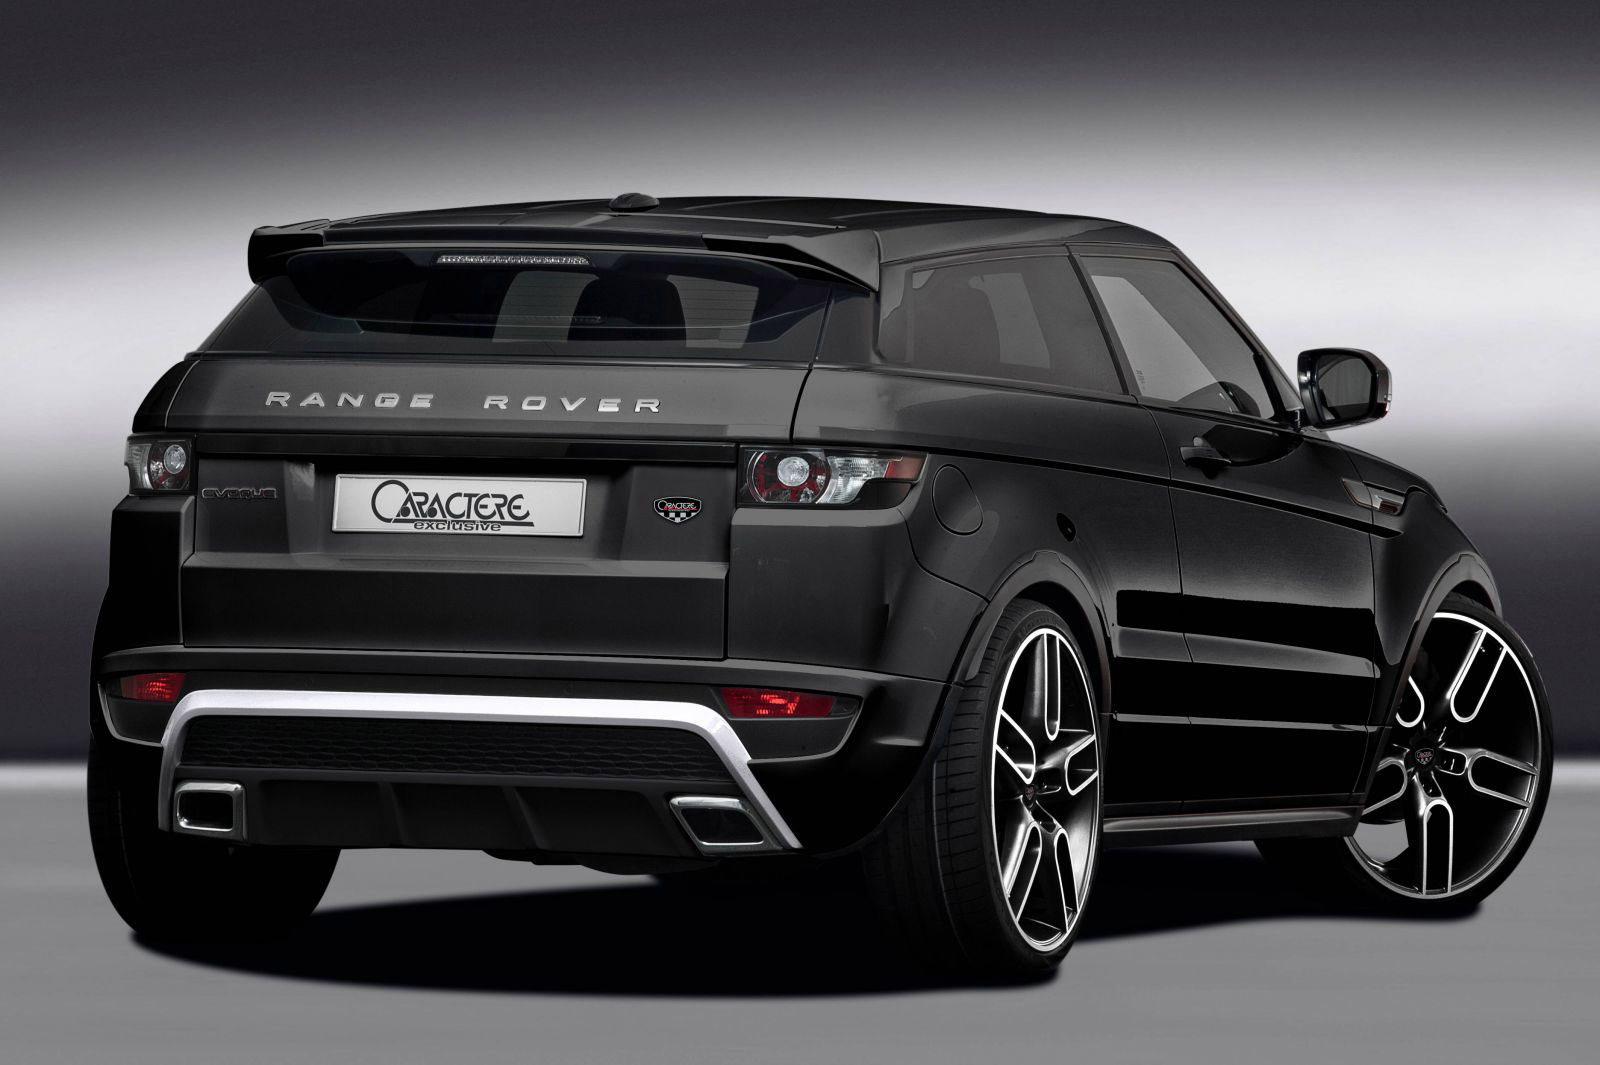 Range Rover Evoque by Caractere